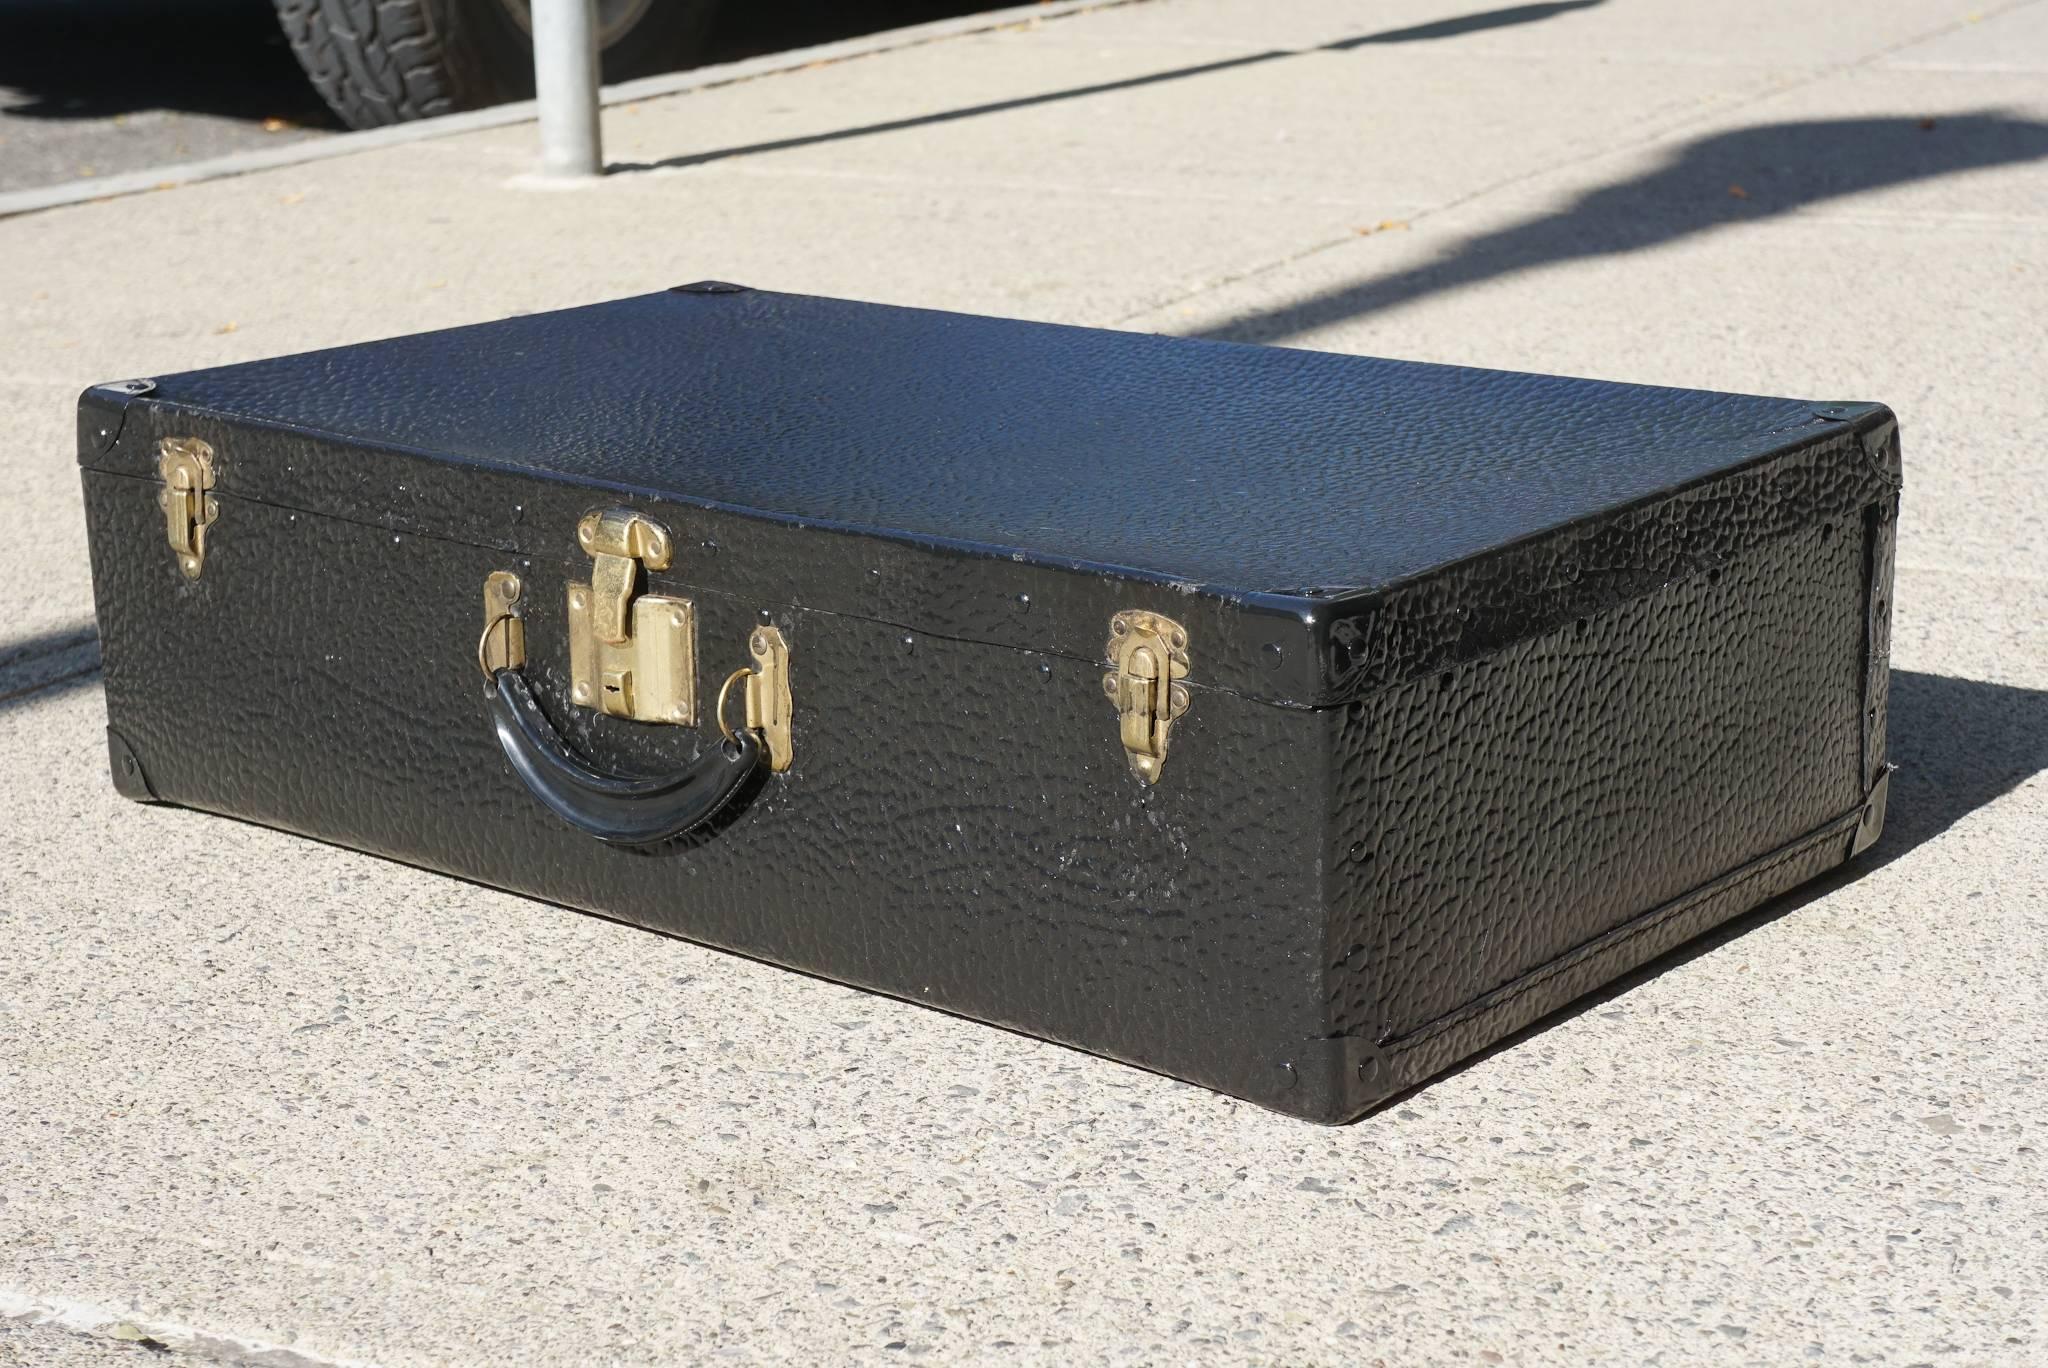 20th Century Collection of Attache Cases and Luggage from the Estate of Paul & Bunny Mellon 